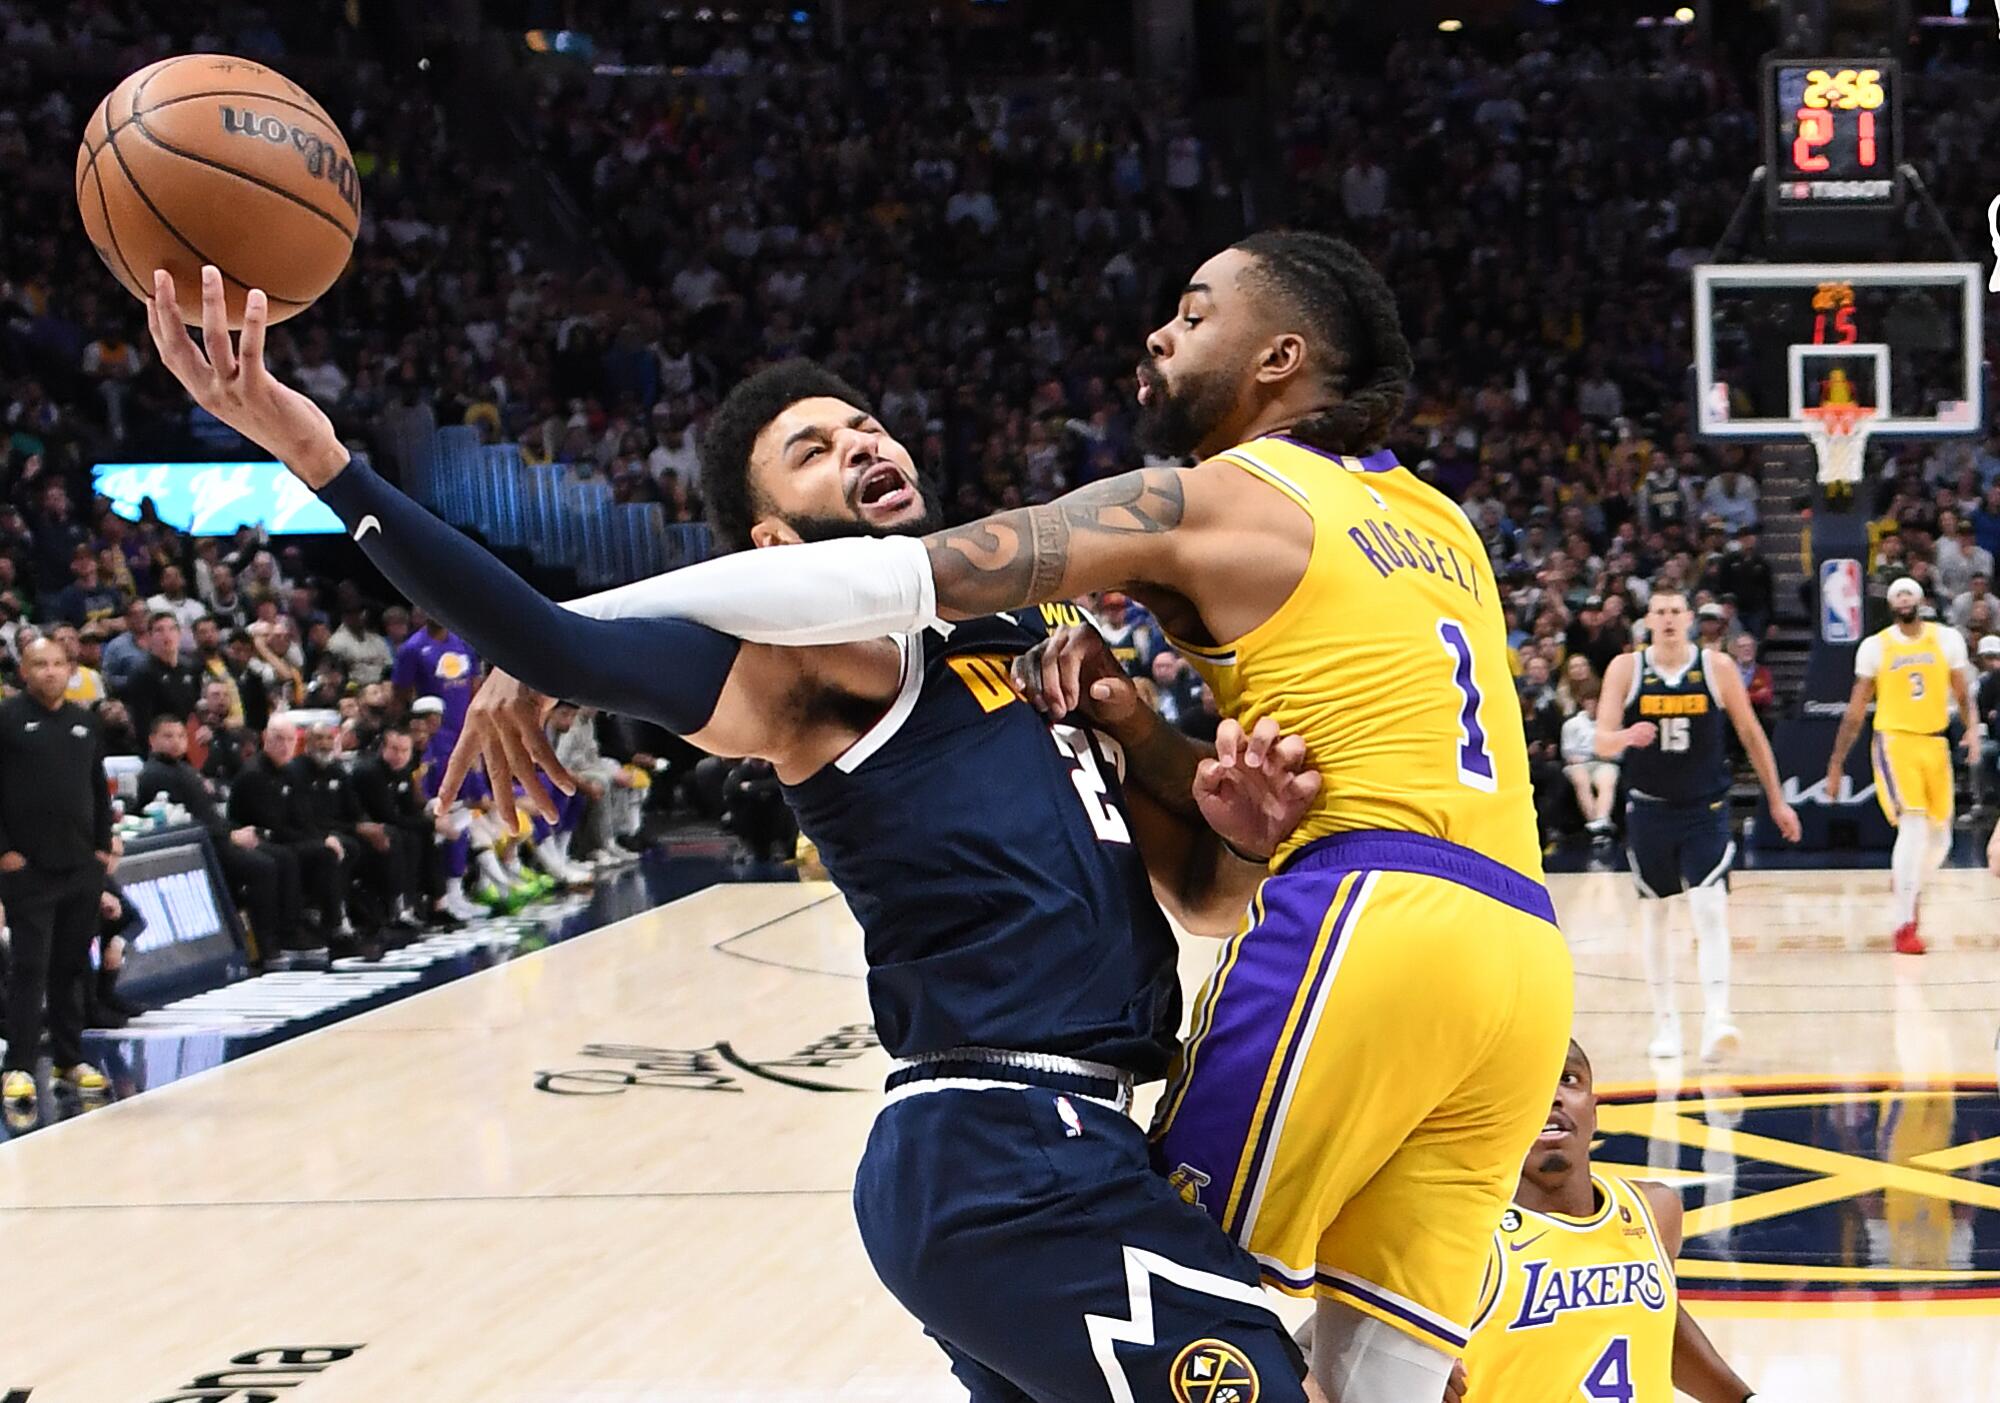 Lakers guard D'Angelo Russell fouls Nuggets guard Jamar Murray in the first quarter.